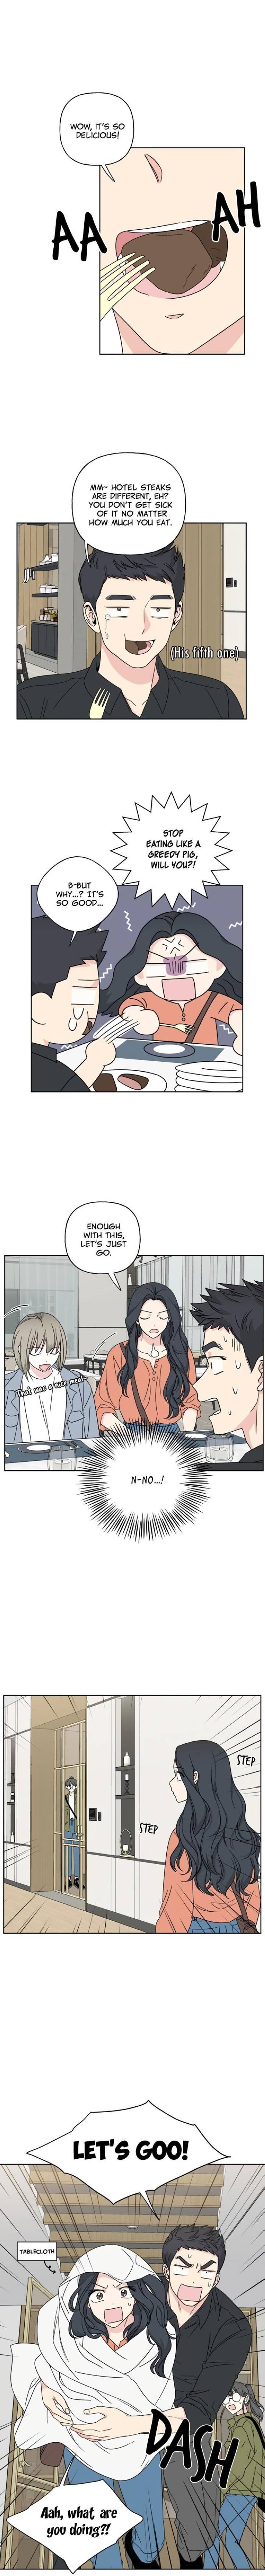 mother-im-sorry-chap-24-3